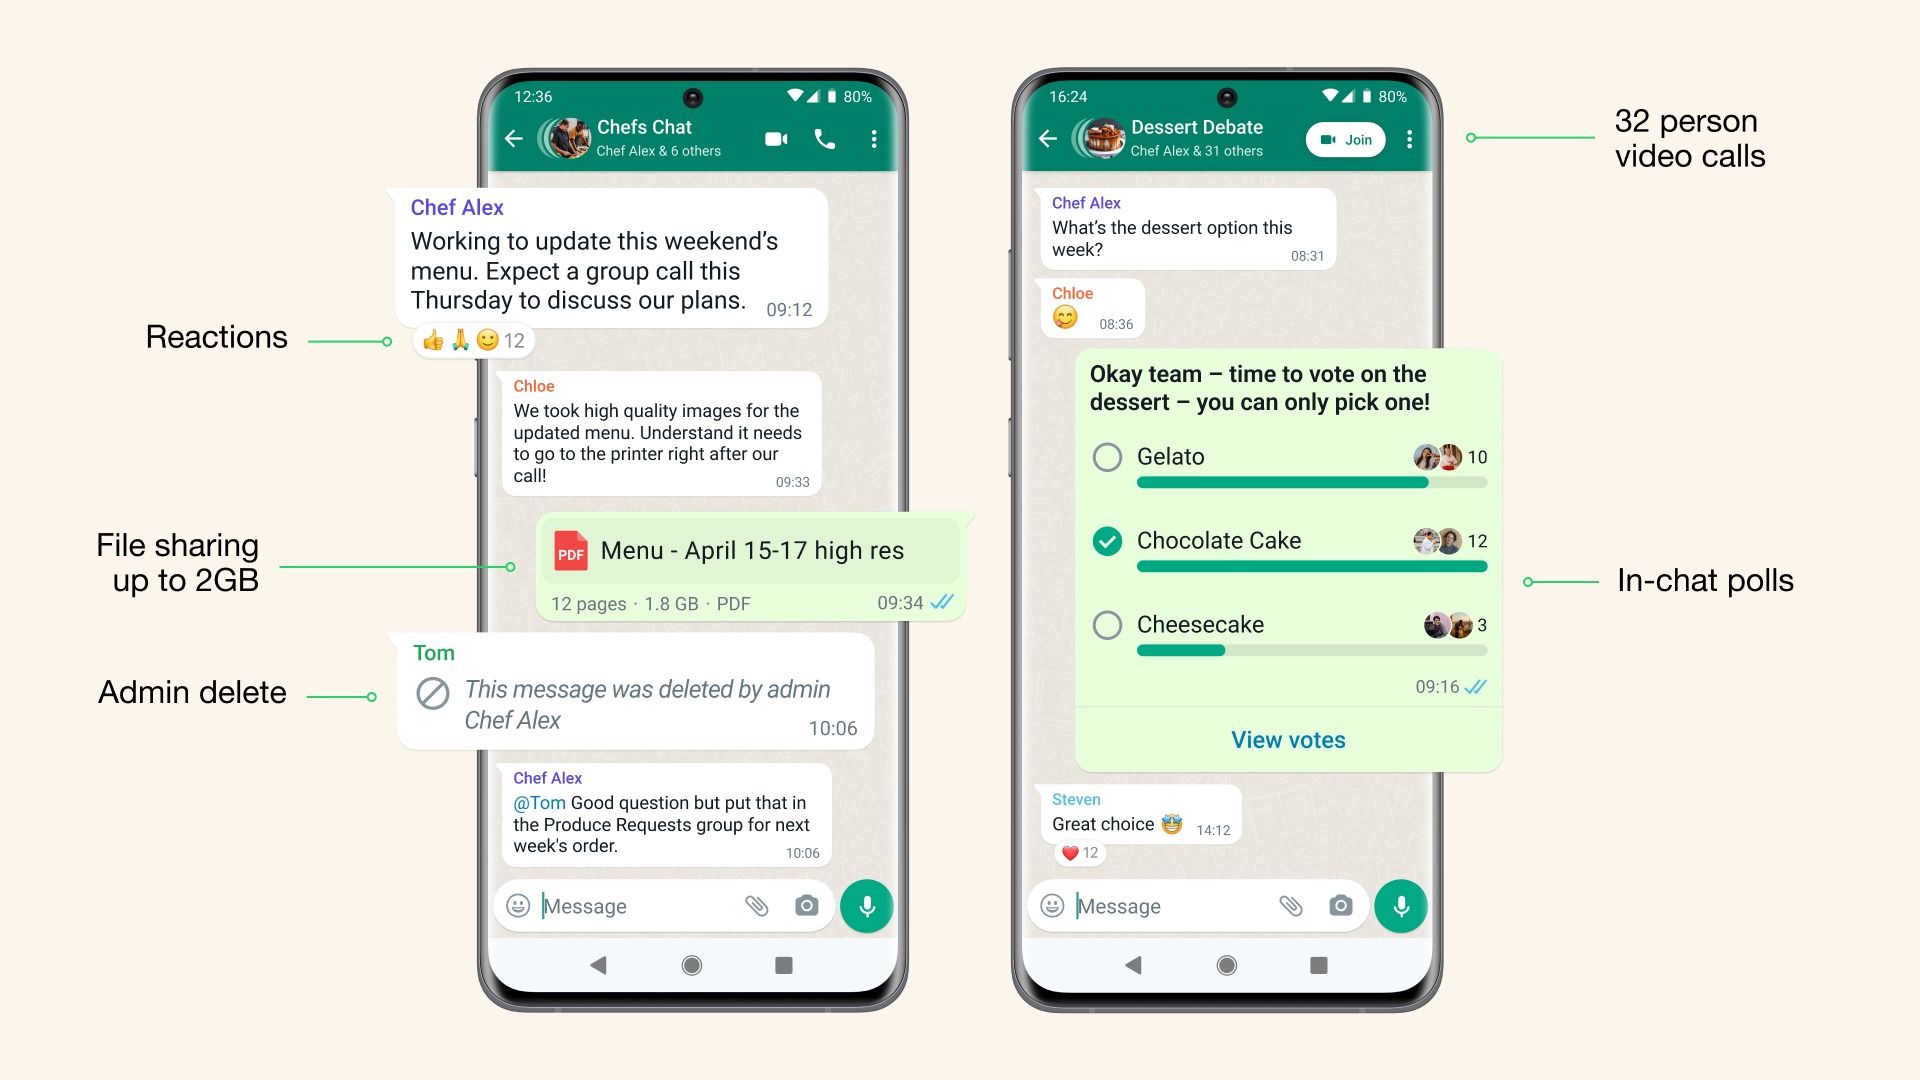 Screenshots highlighting recently released WhatsApp features on cream background.